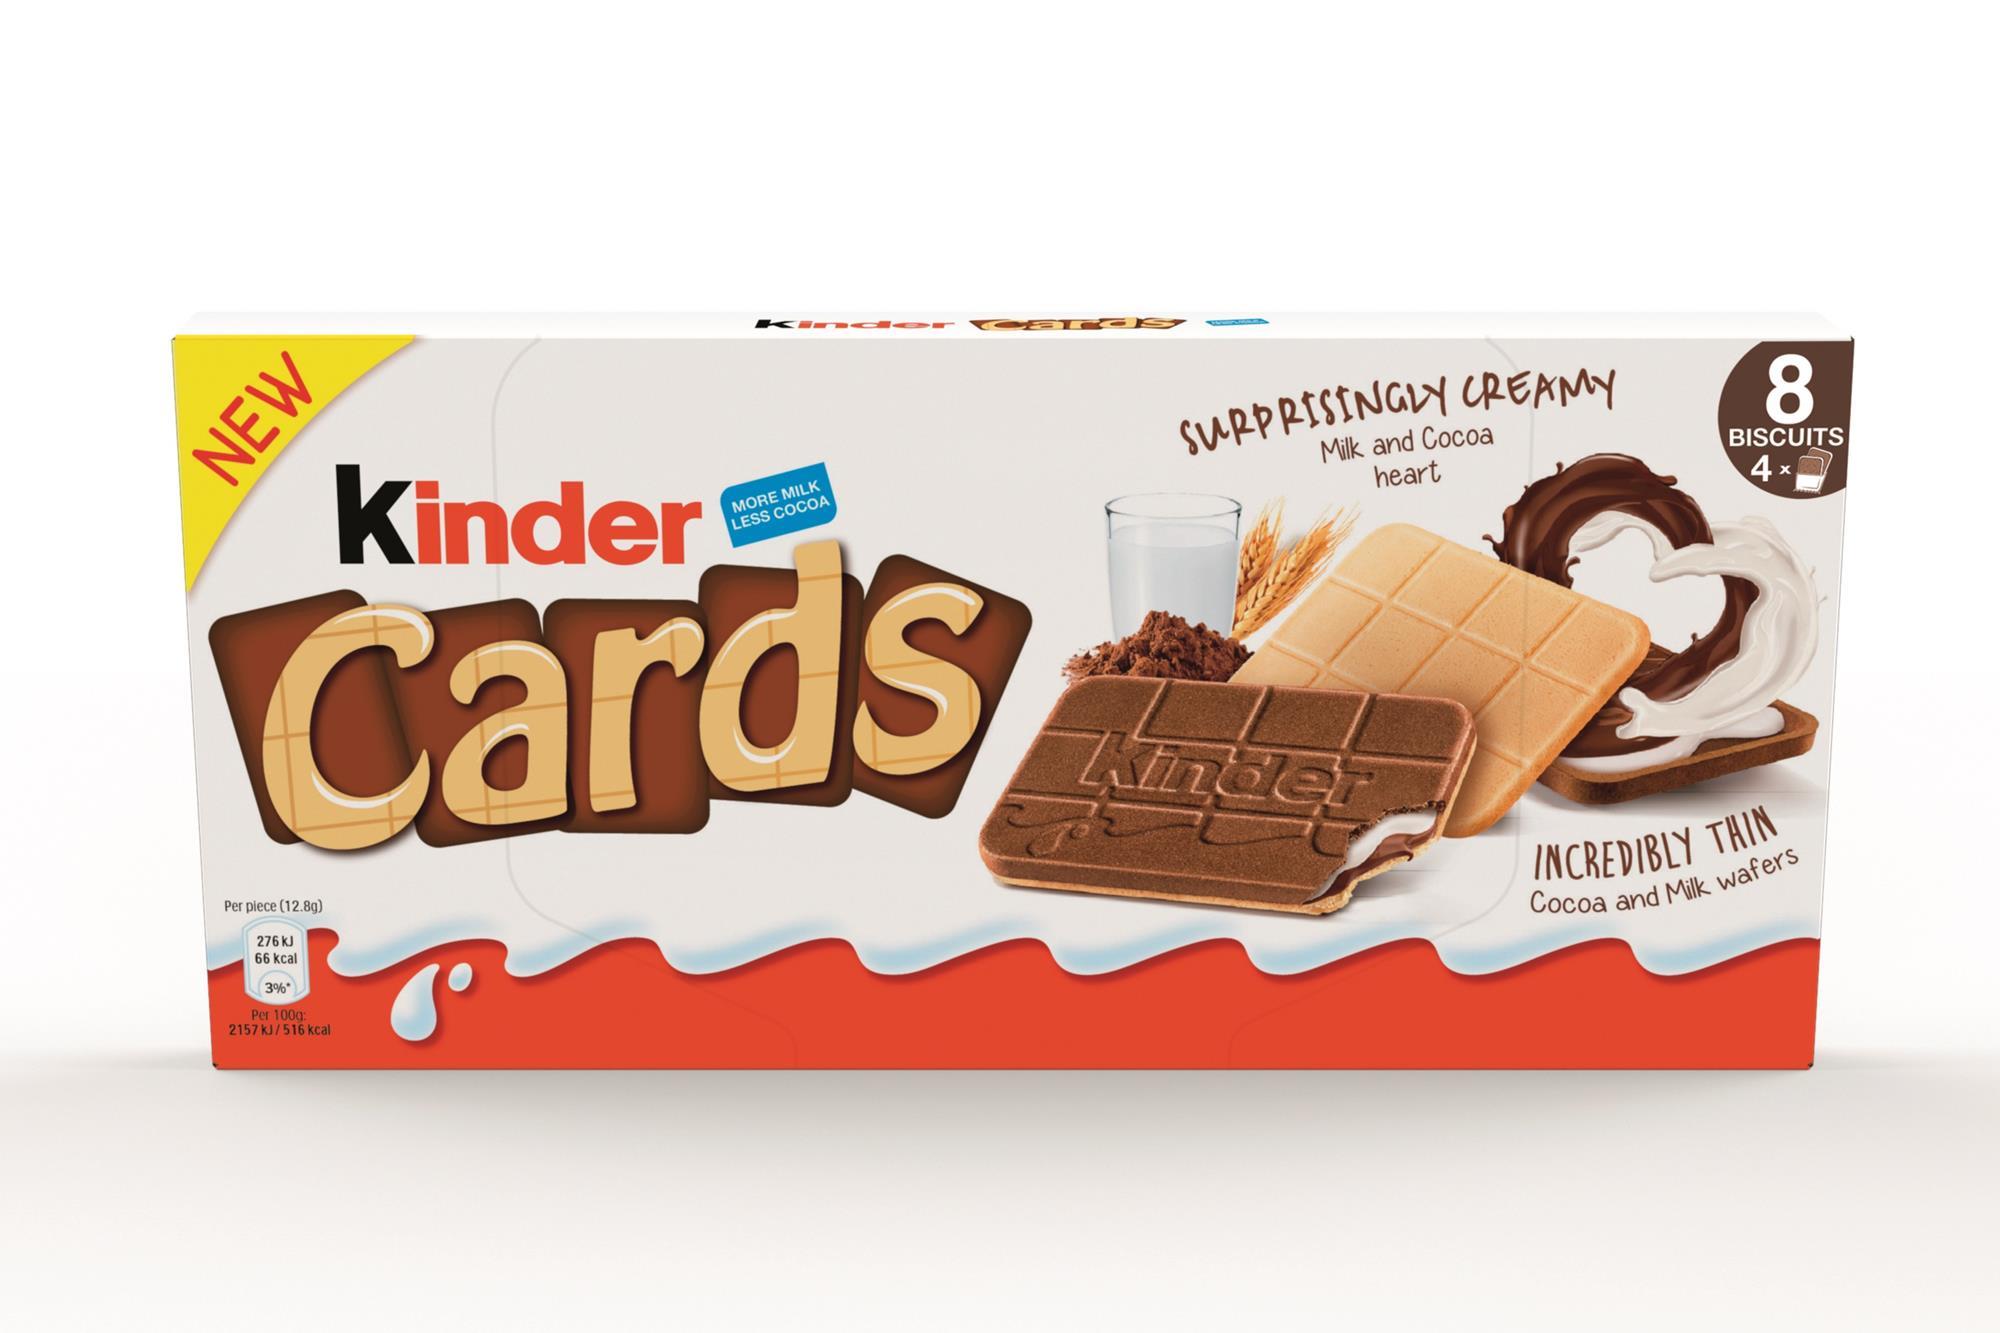 Back in Stock! Kinder Cards is a new unique biscuit with a